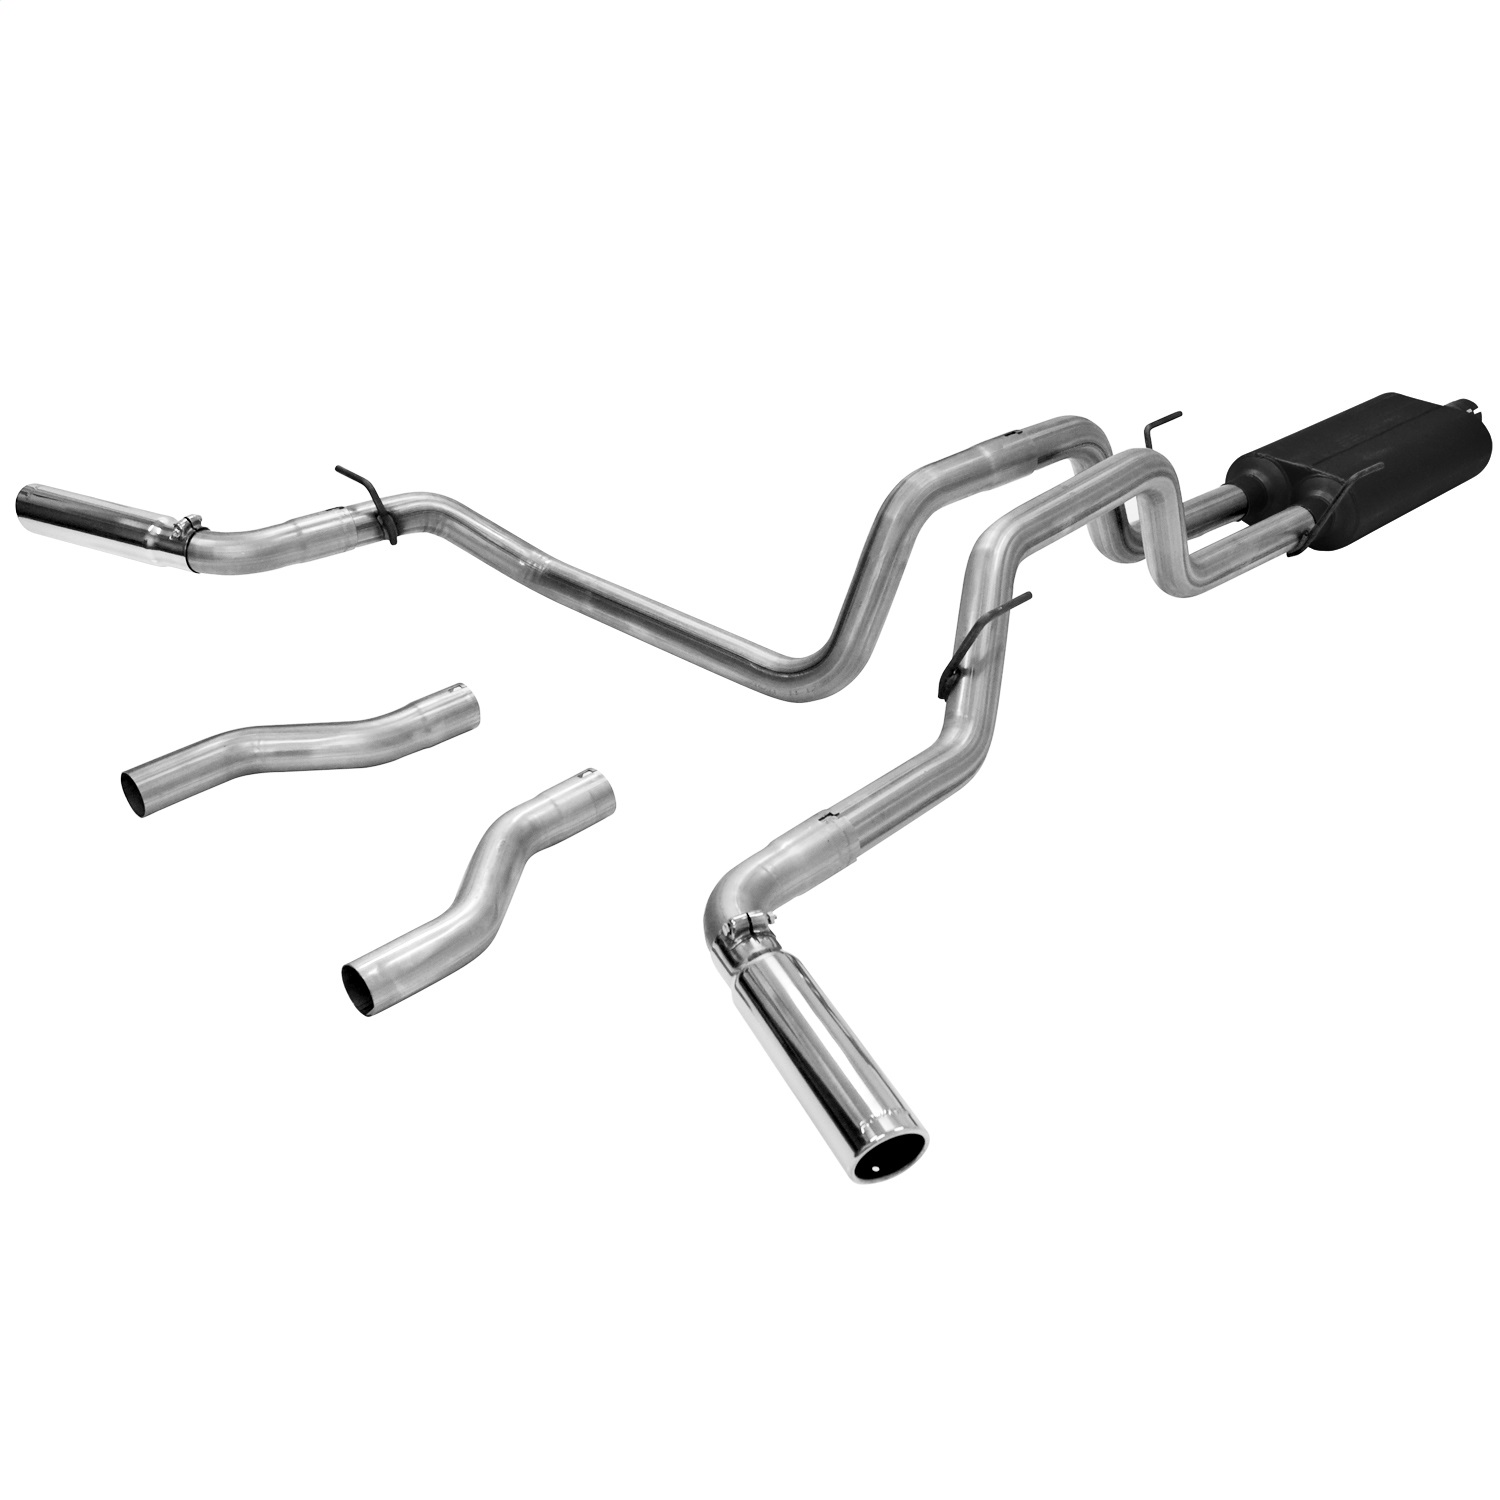 Flowmaster Flowmaster 817397 American Thunder Cat Back Exhaust System Fits 04-05 Ram 1500